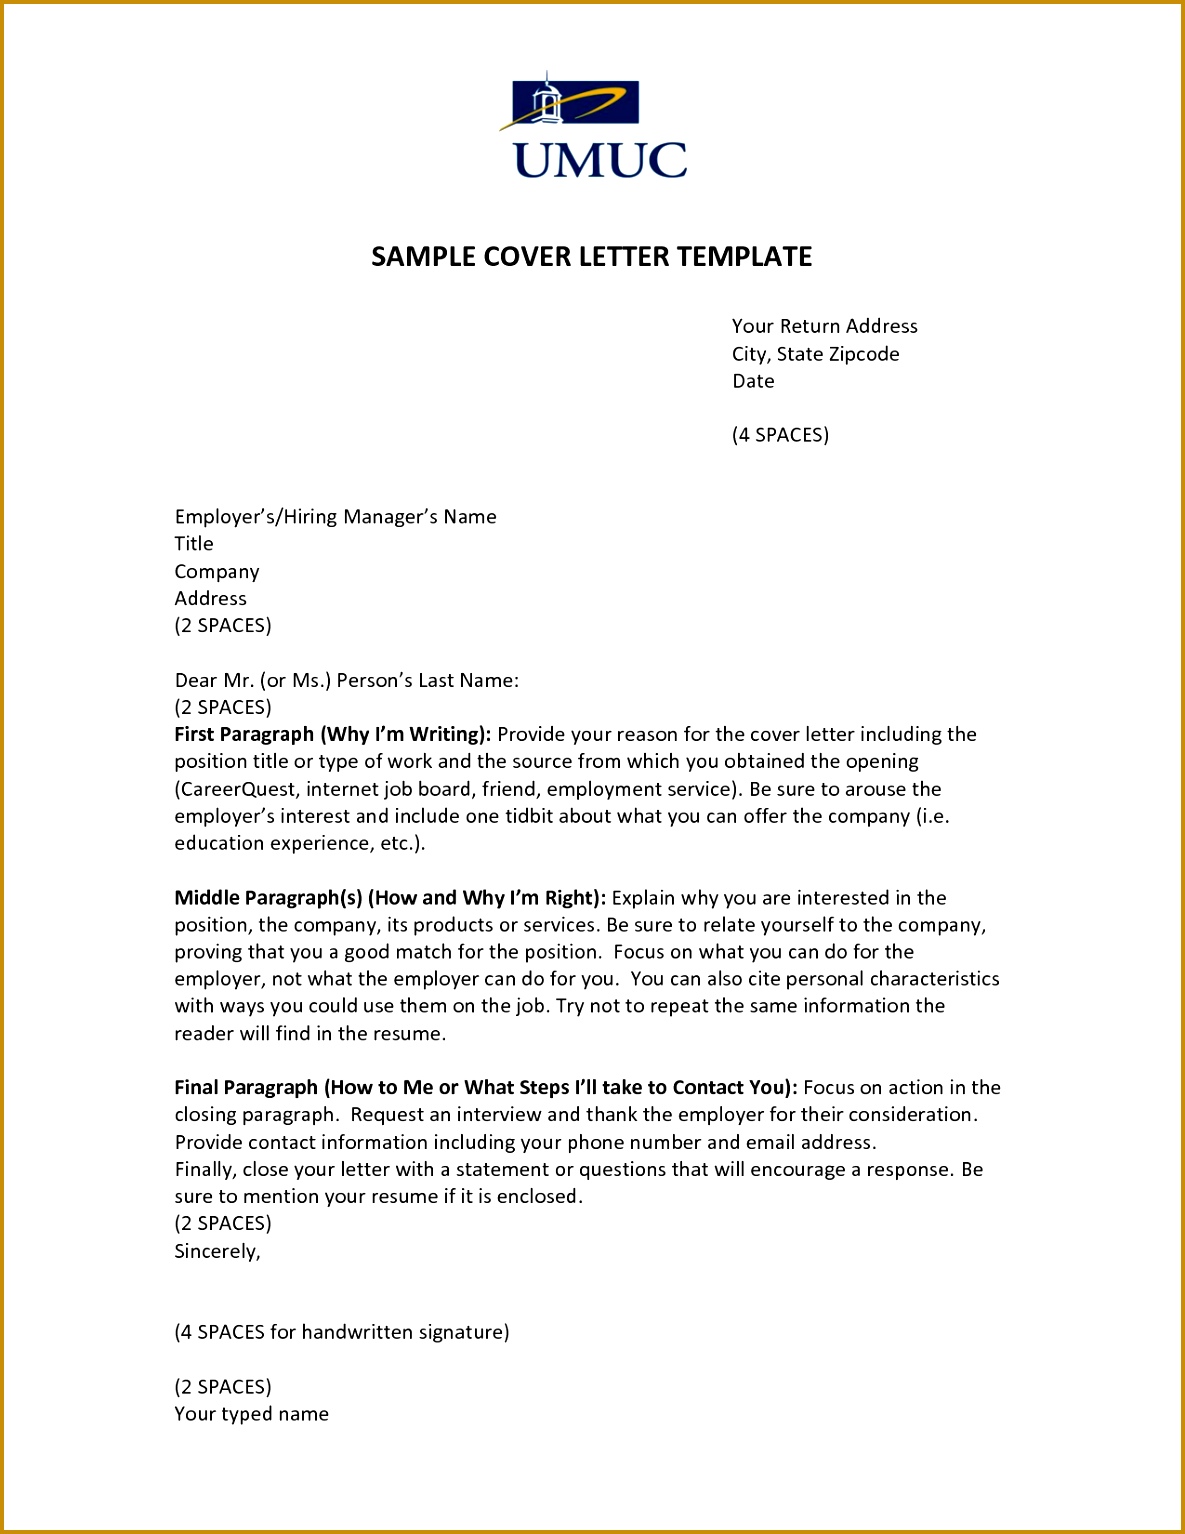 Closing statement for cover letter gallery cover letter sample closing cover letters monpence madrichimfo gallery madrichimfo 15341185